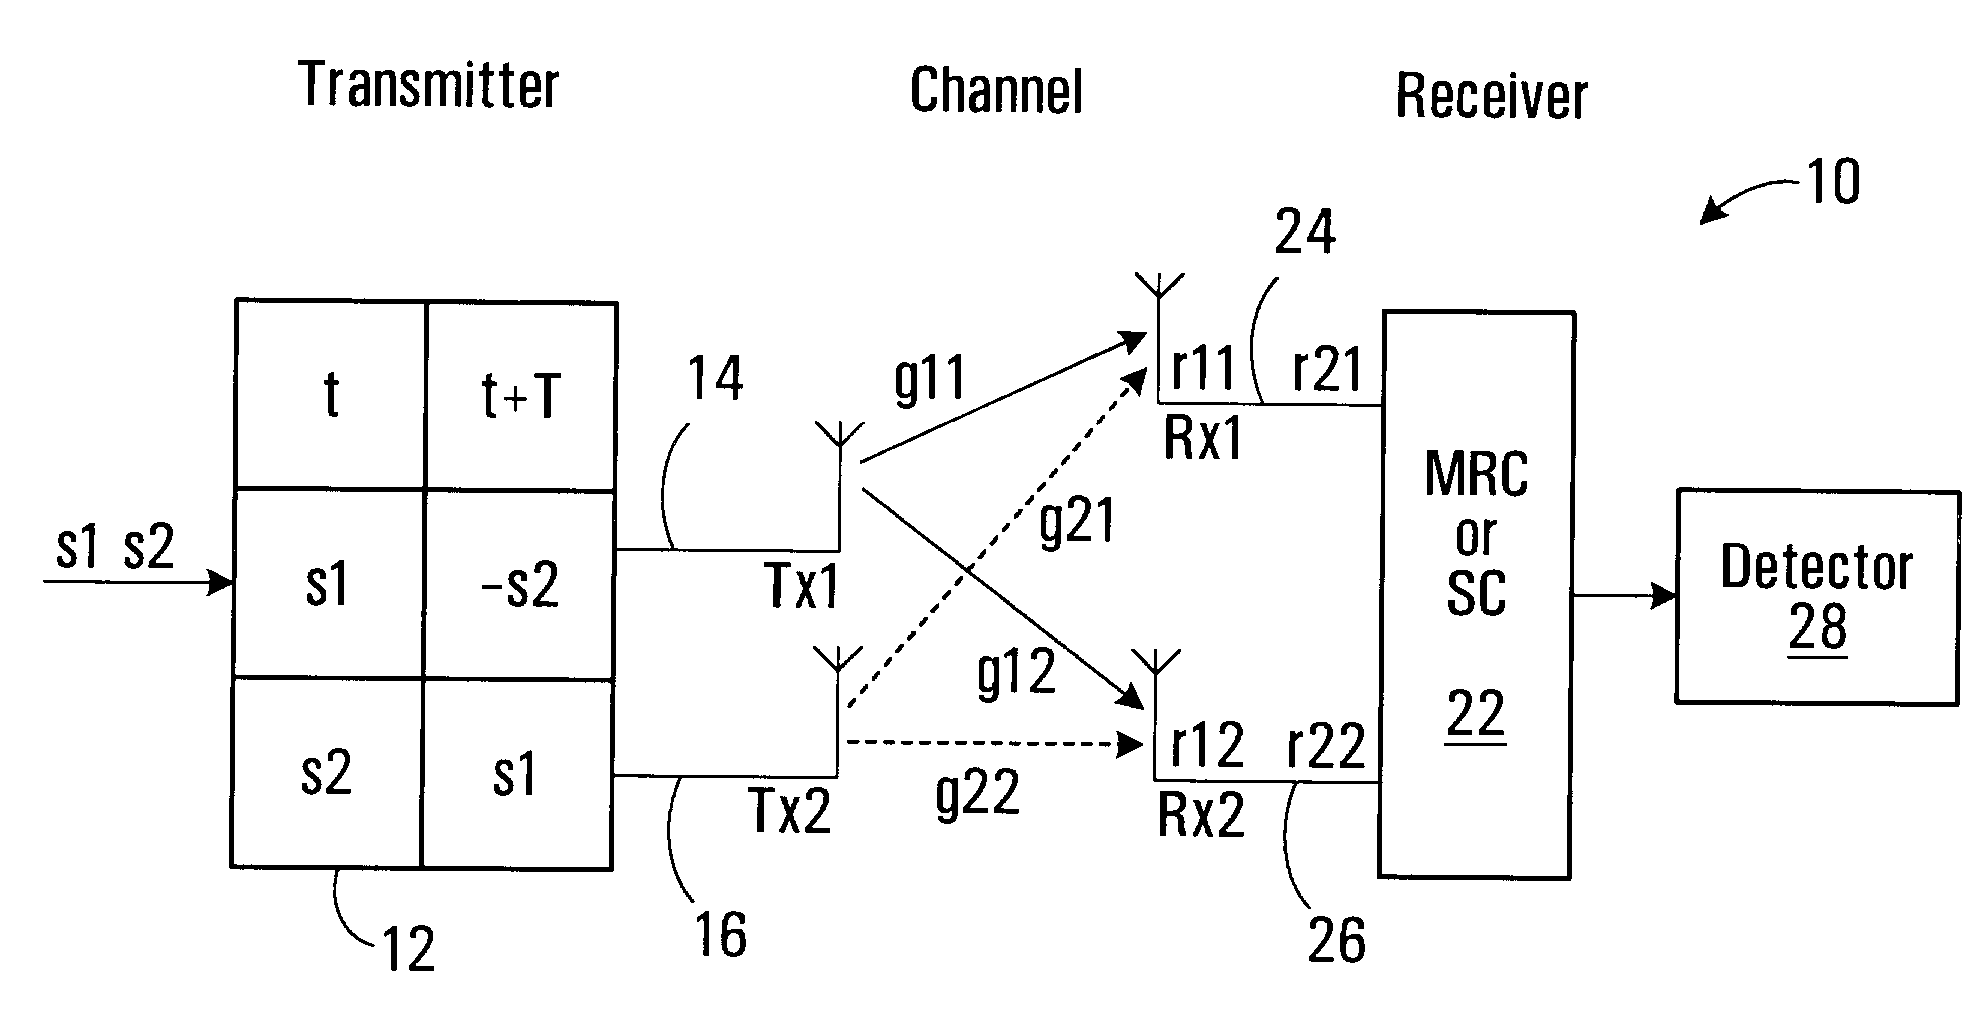 Antenna Selection Apparatus and Methods